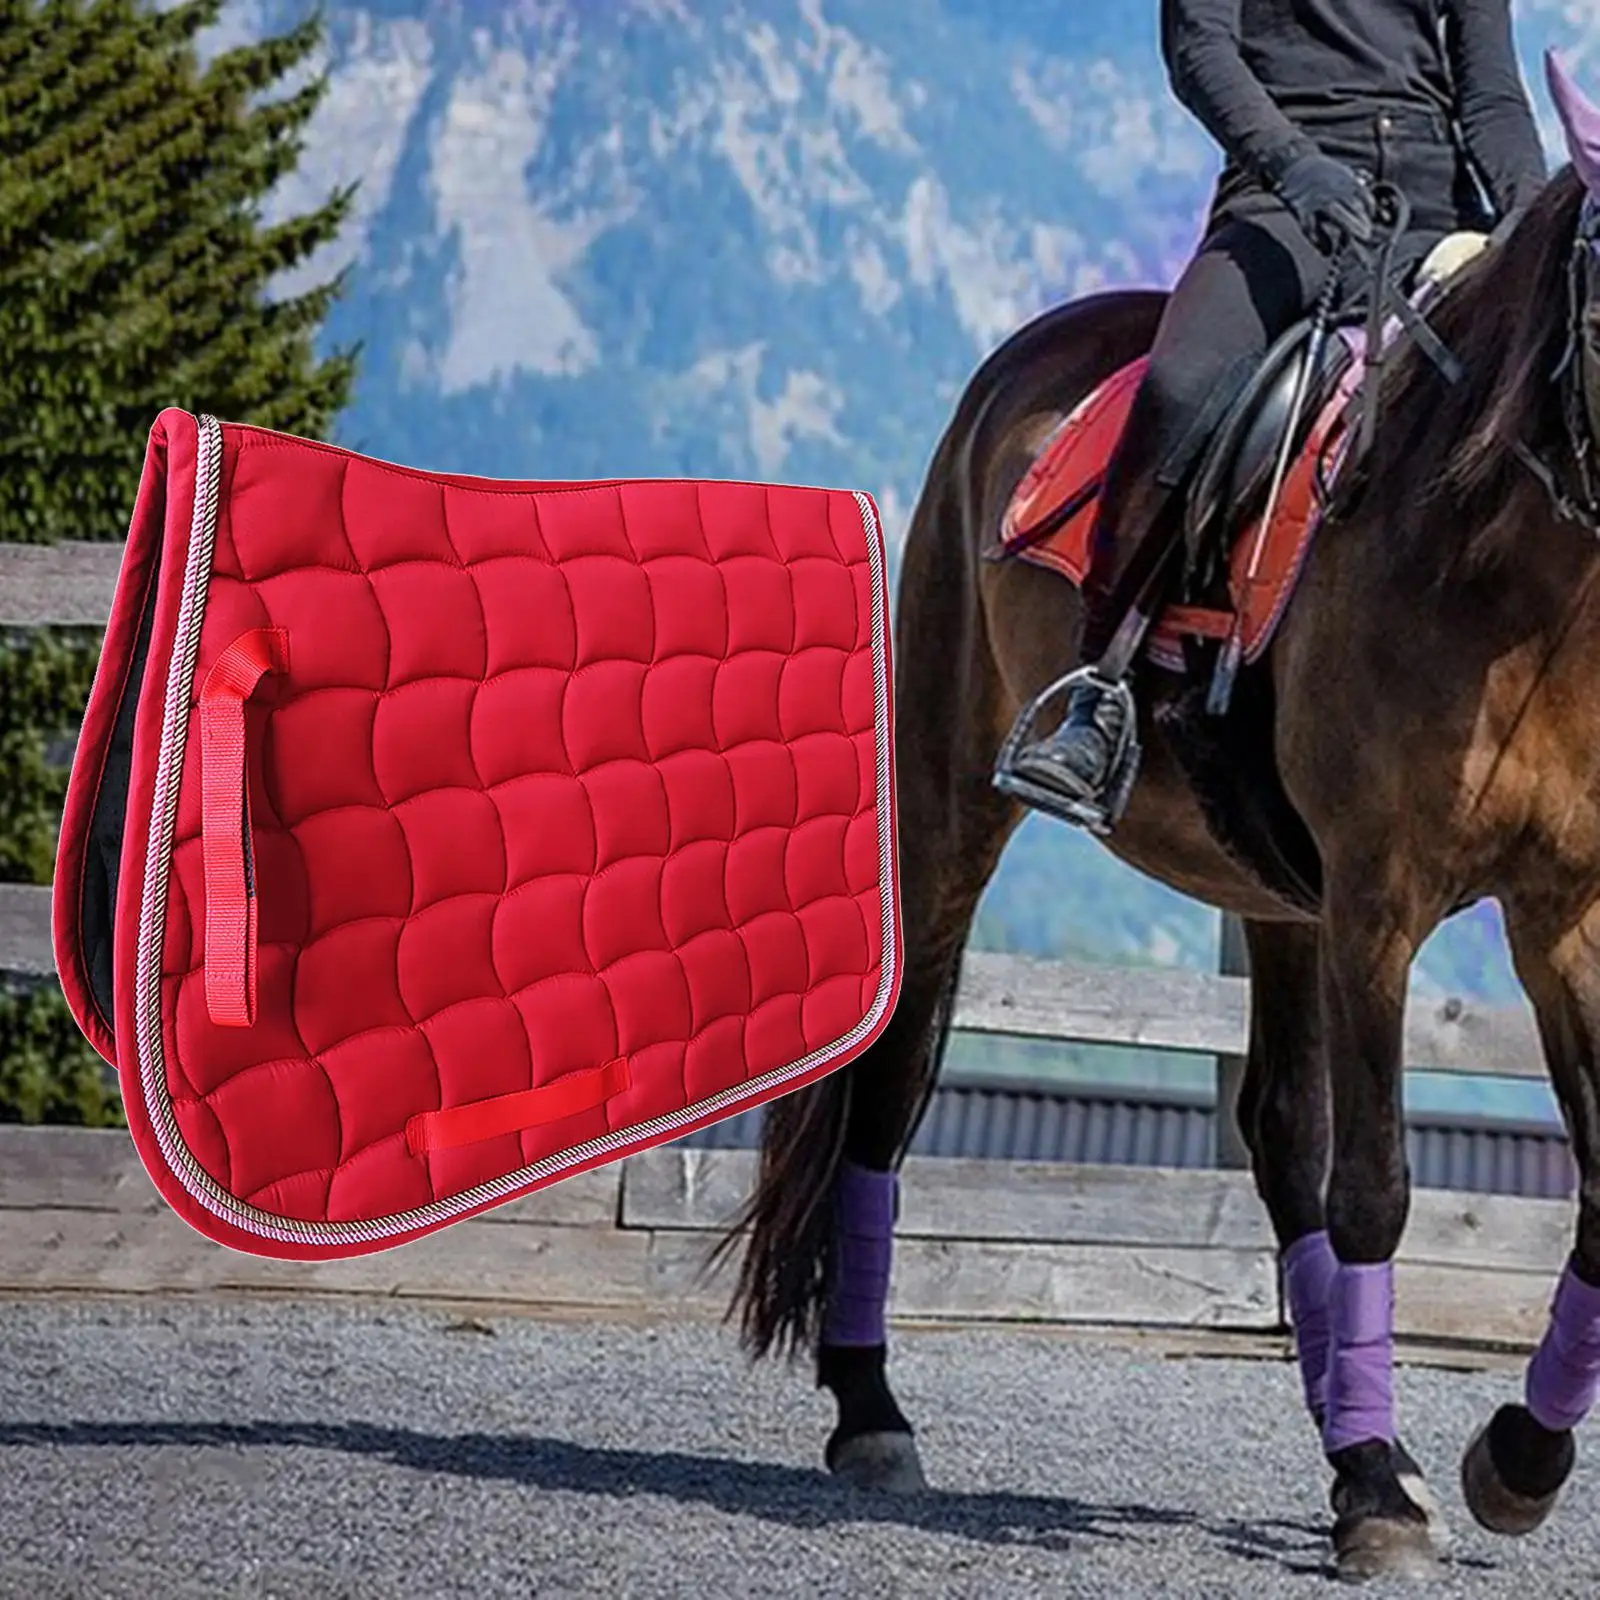 Horse Riding Saddle Pad Breathable Seat Cushion Anti-Slip Saddle Cushion  Soft Cotton For Equestrian Horse Equipment Red